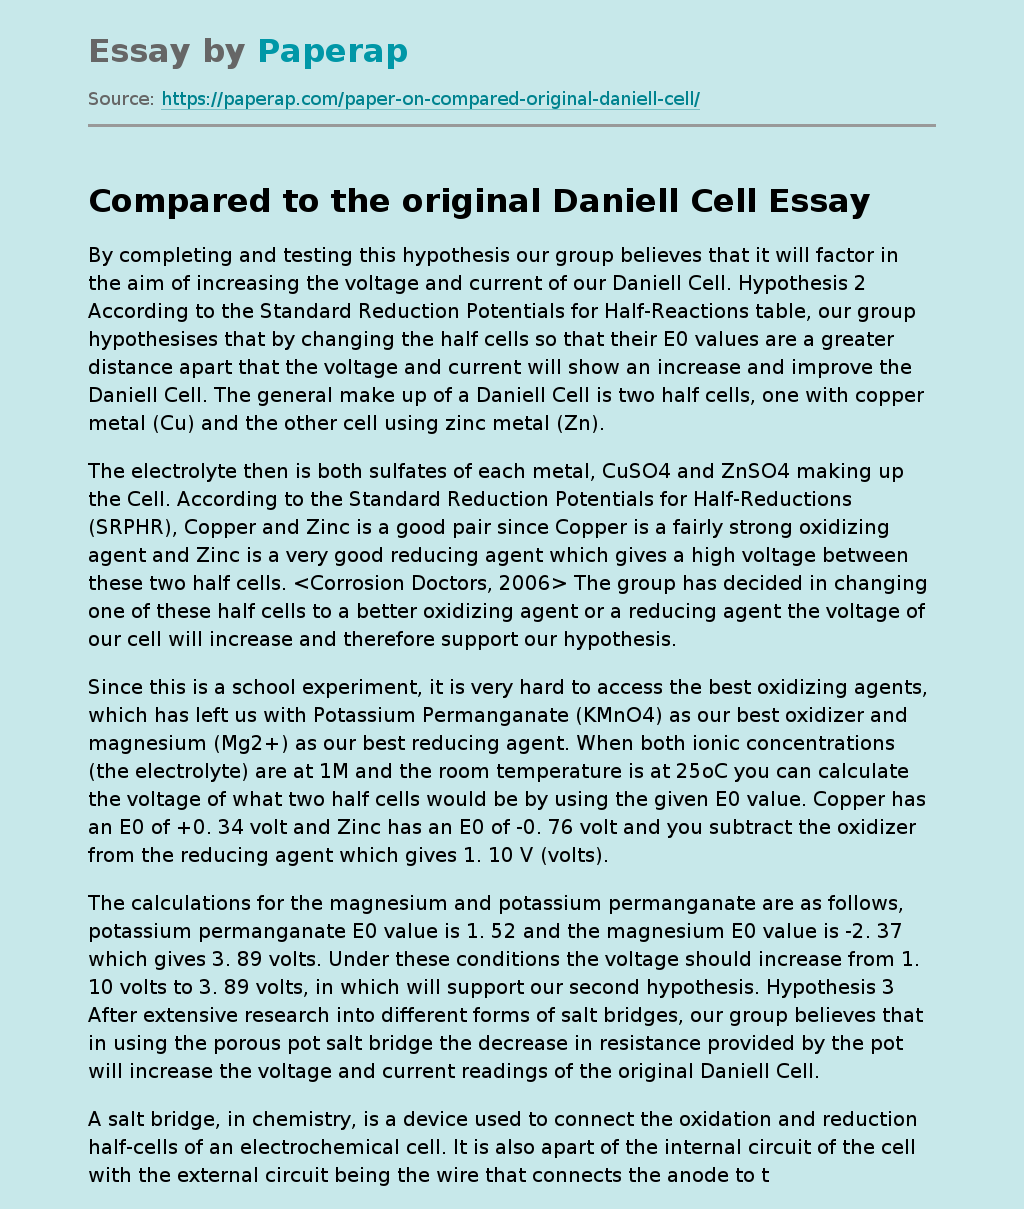 Compared to the original Daniell Cell